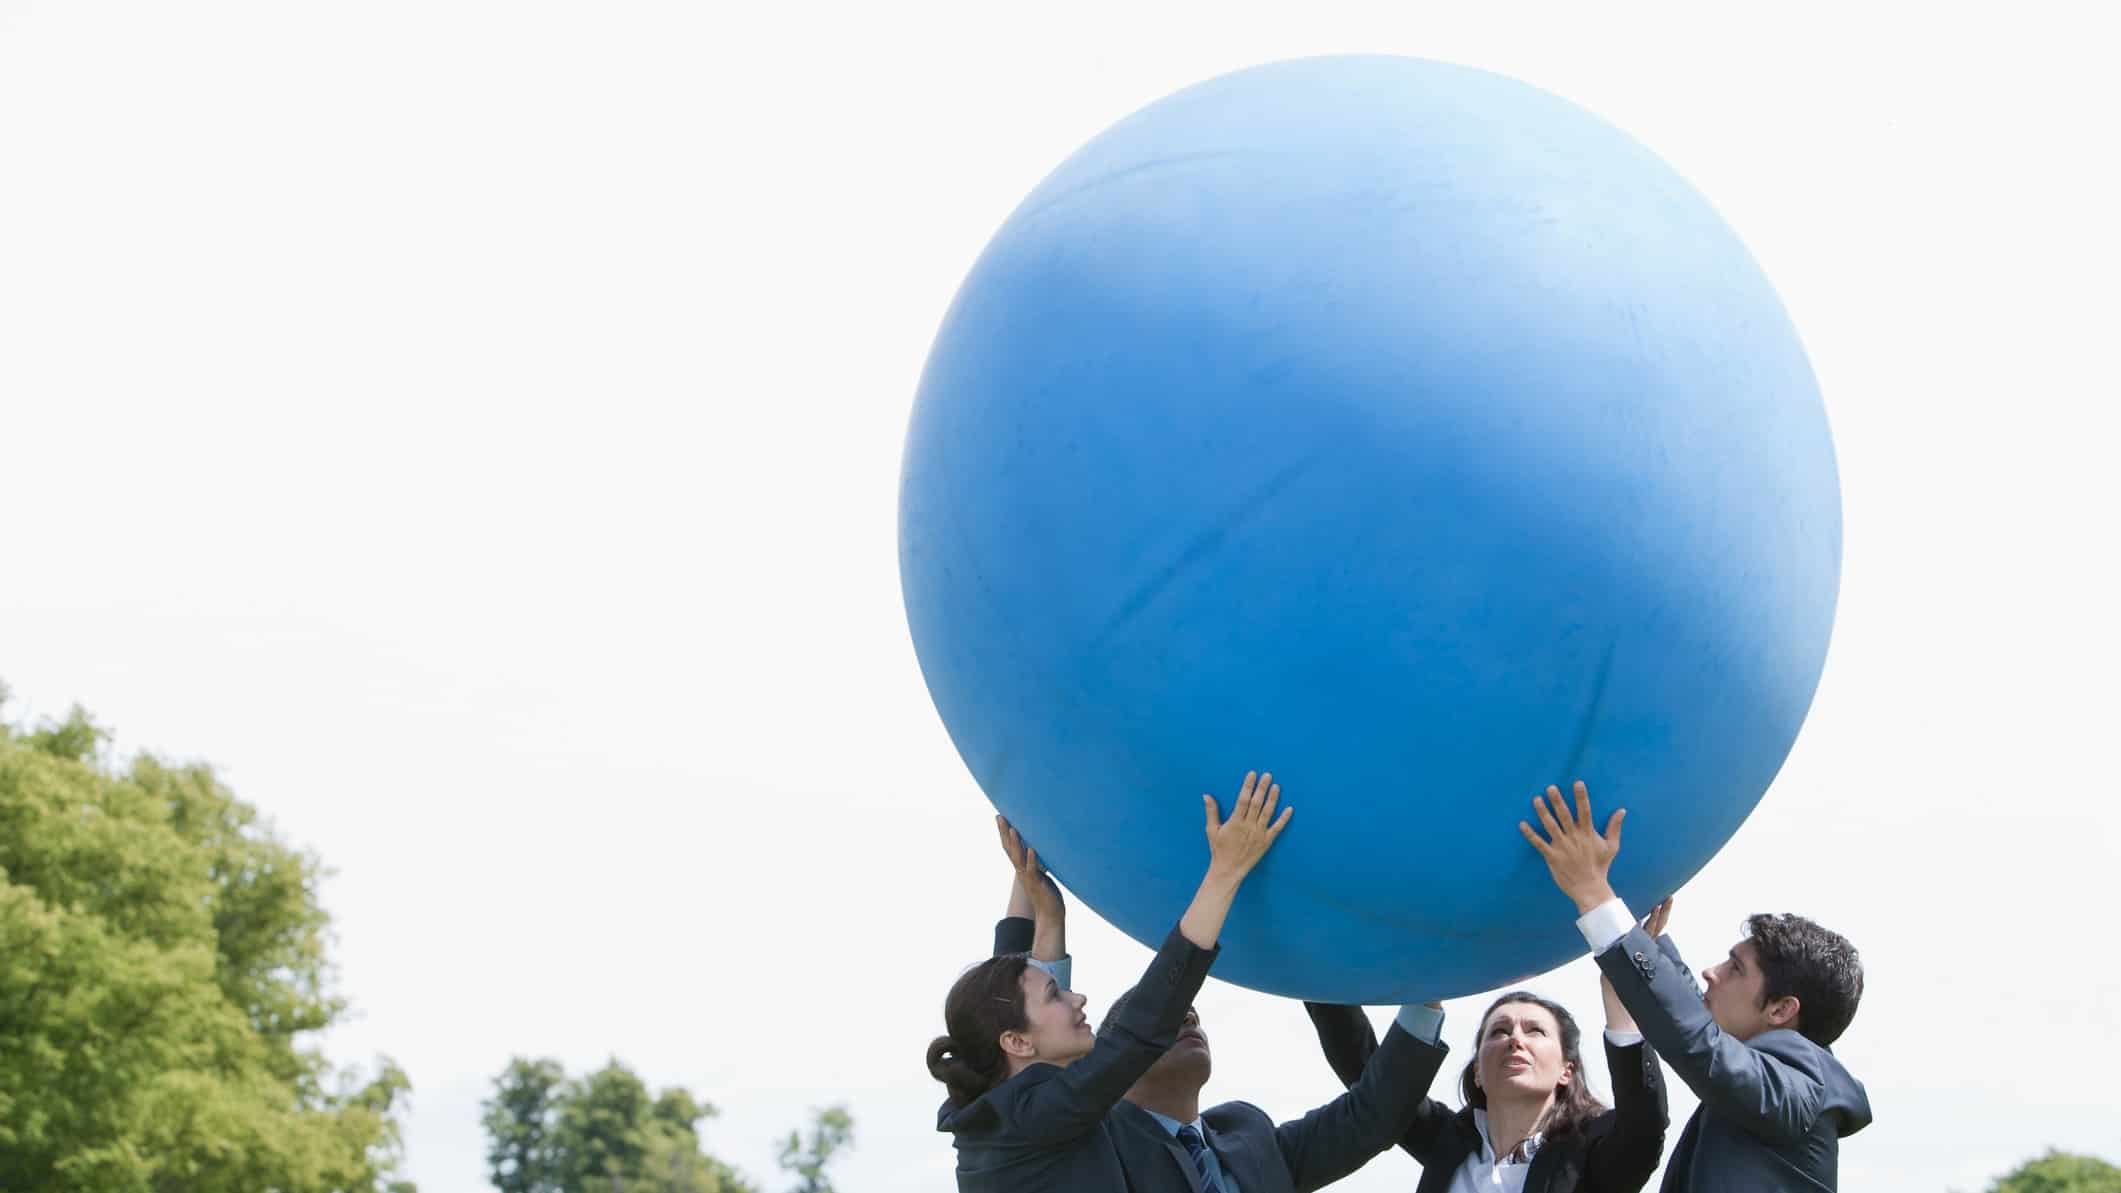 A team lifts a giant inflated ball high into the air, succeeding despite rising inflation.